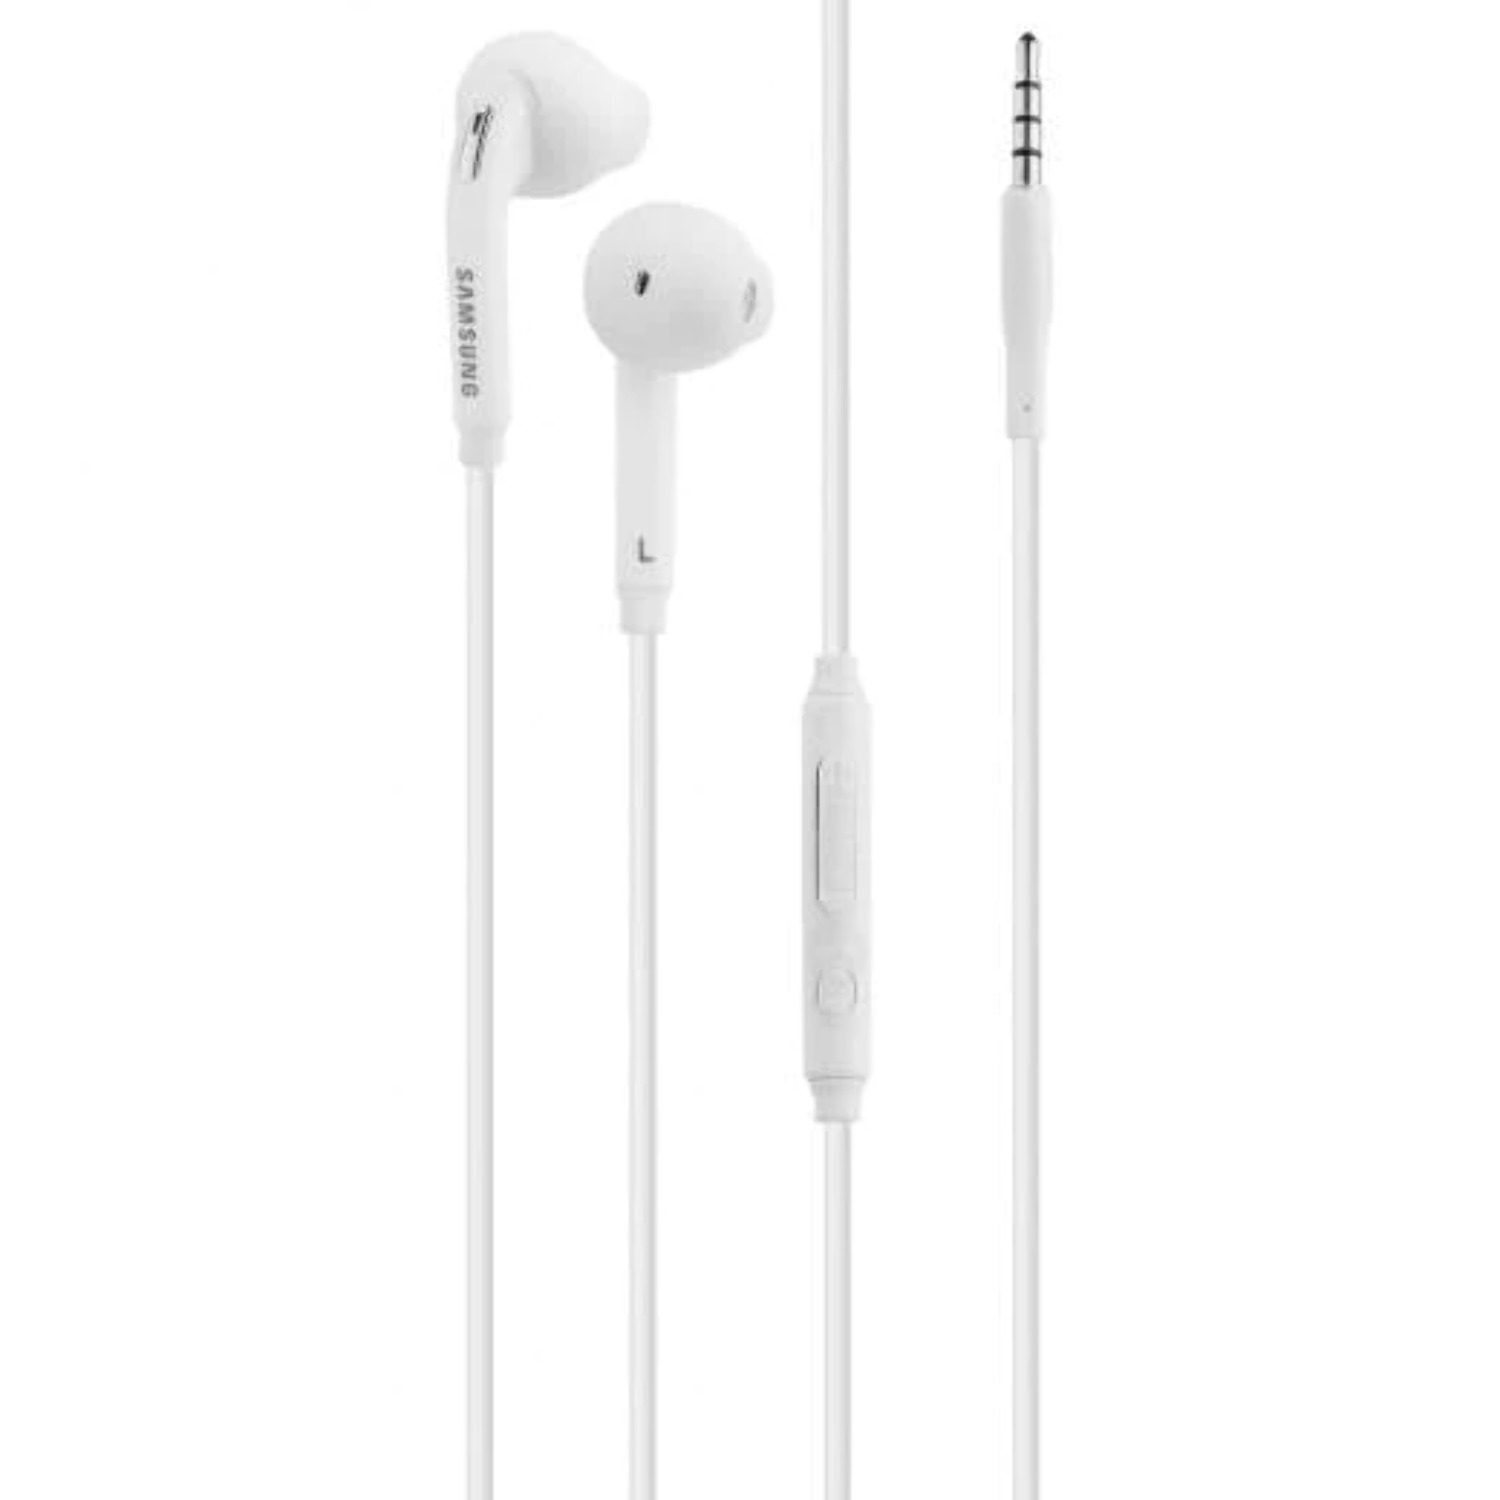 Premium Wired Headset 3.5mm Earbud Stereo In-Ear Headphones with in-line Remote & Microphone Compatible with Samsung Galaxy S4 Active - image 1 of 1